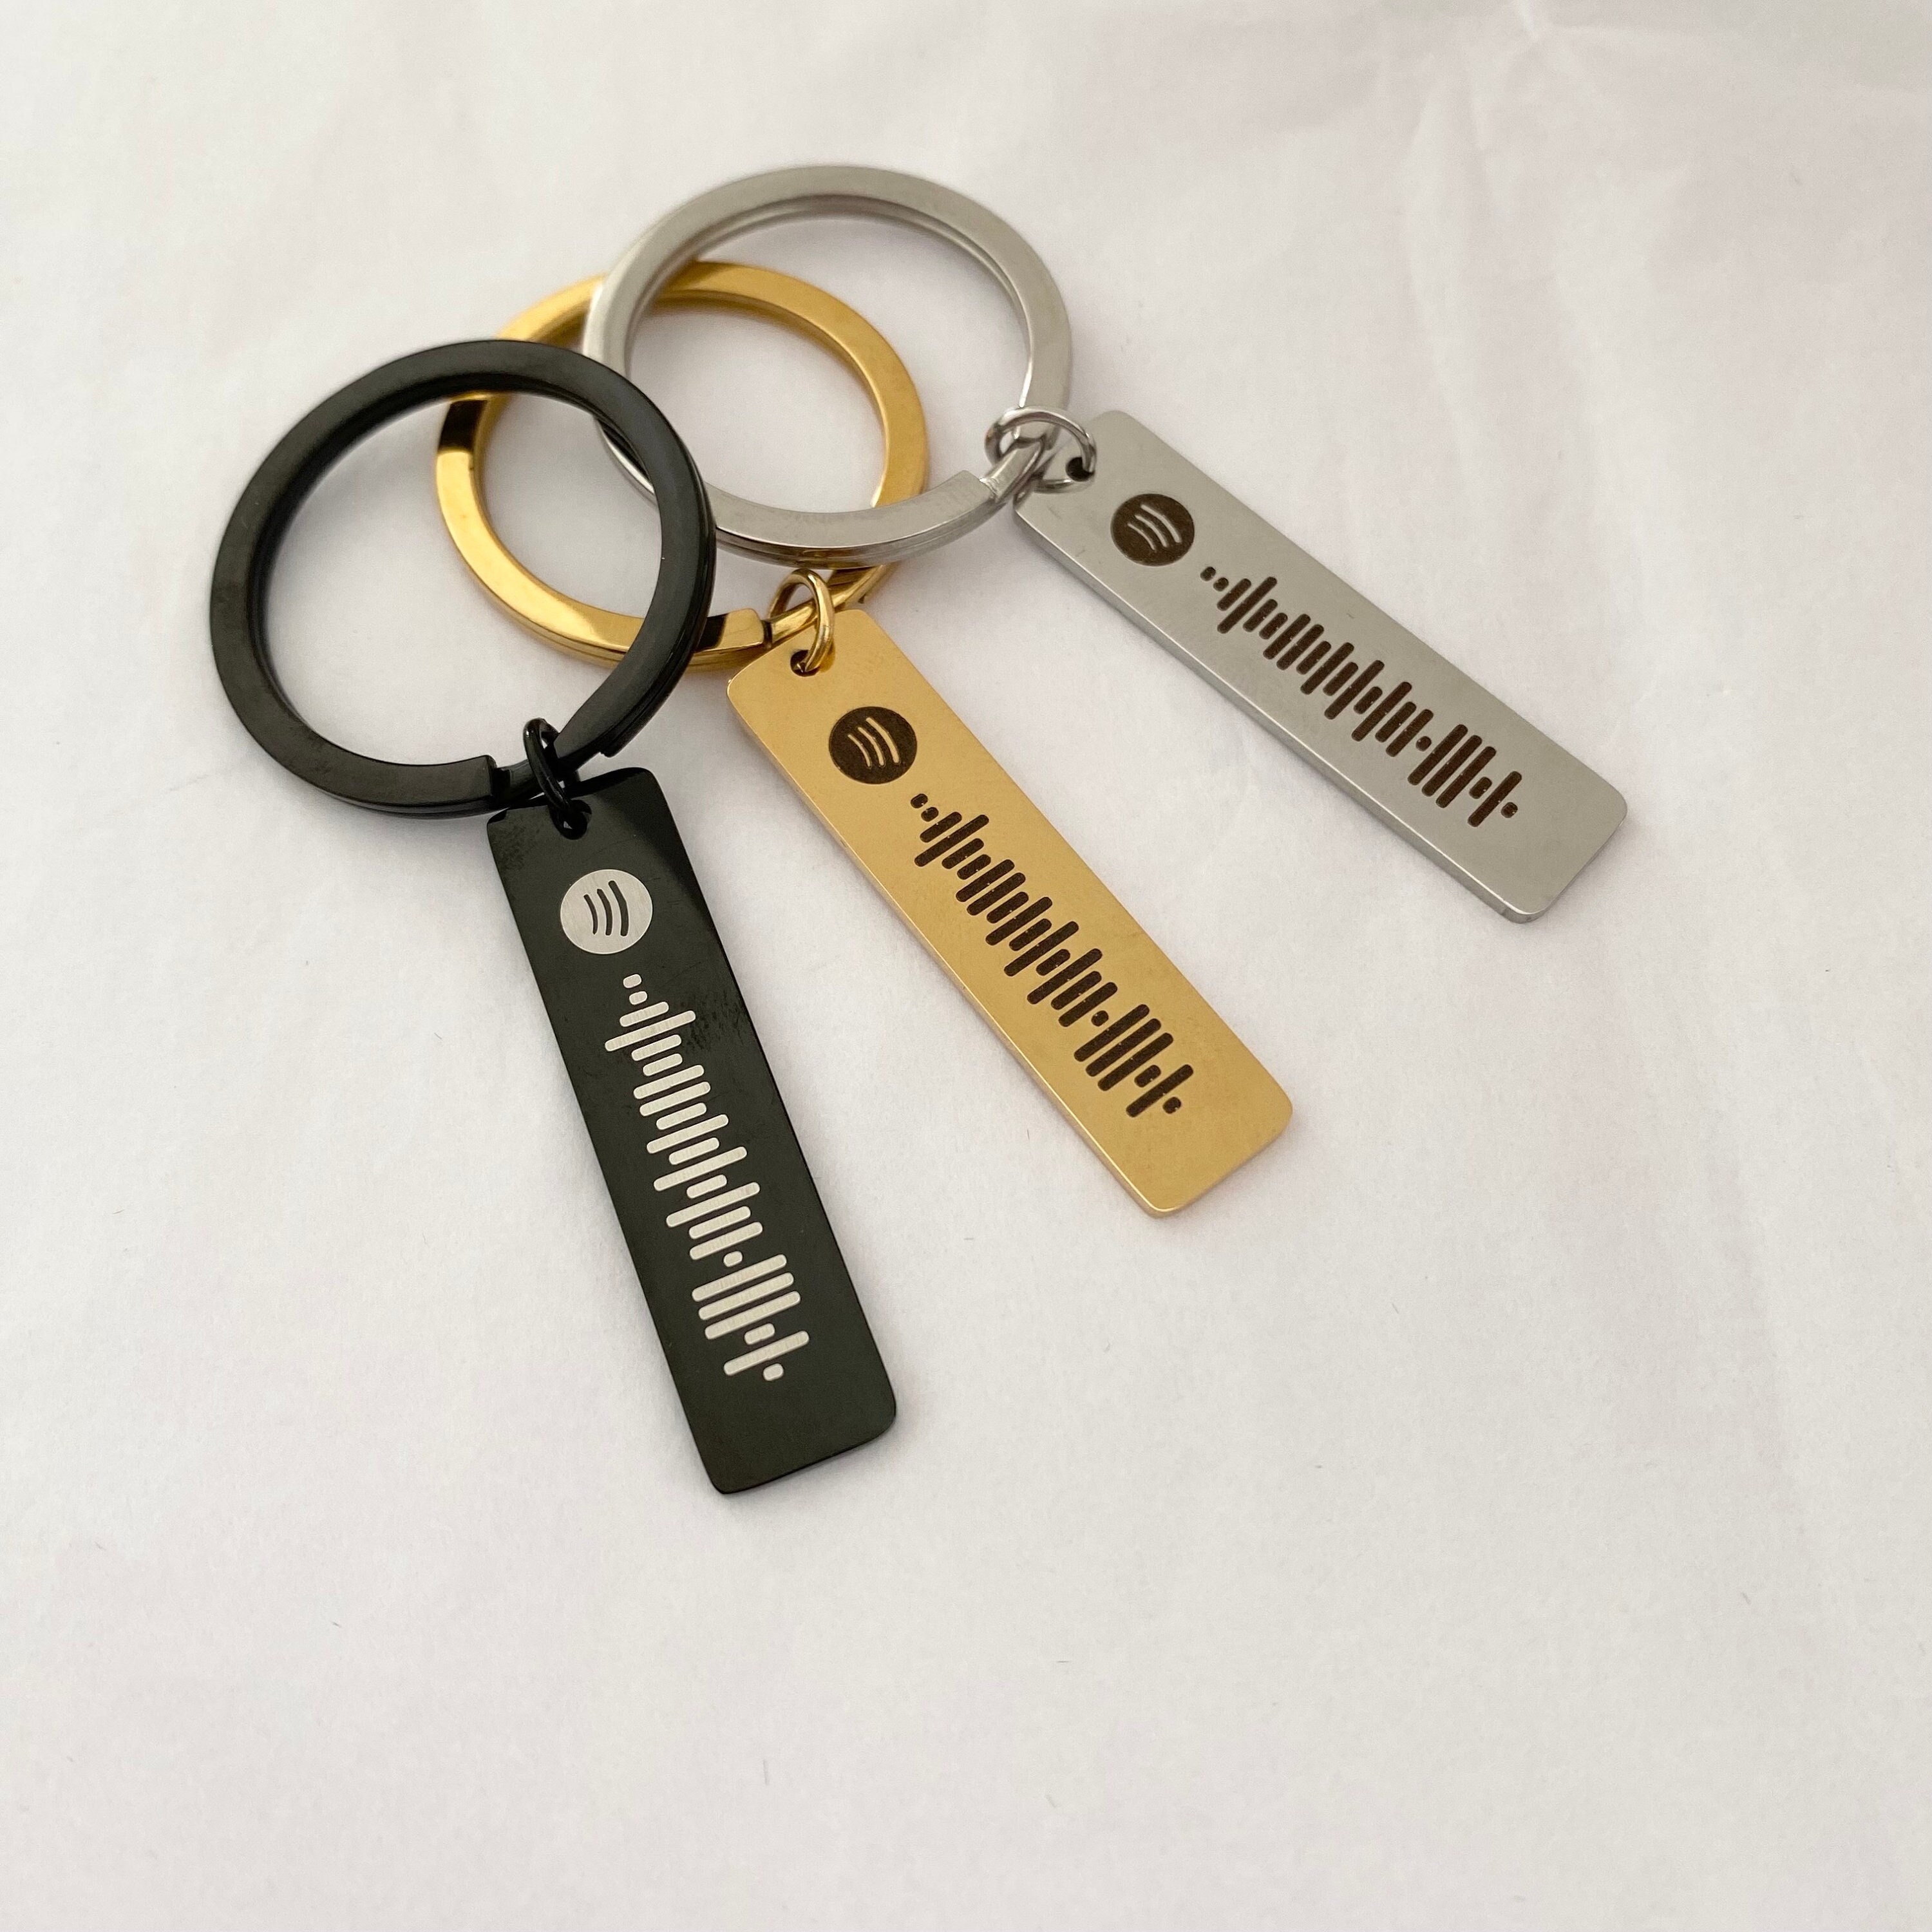 custom White acrylic keychains, song keychain, music keychain, spotify diy  keychain with spotify code of Sunflower - Spider-Man: Into The Spider-Verse,  spotify album cover of Spider-Man: Into The Spider-Verse